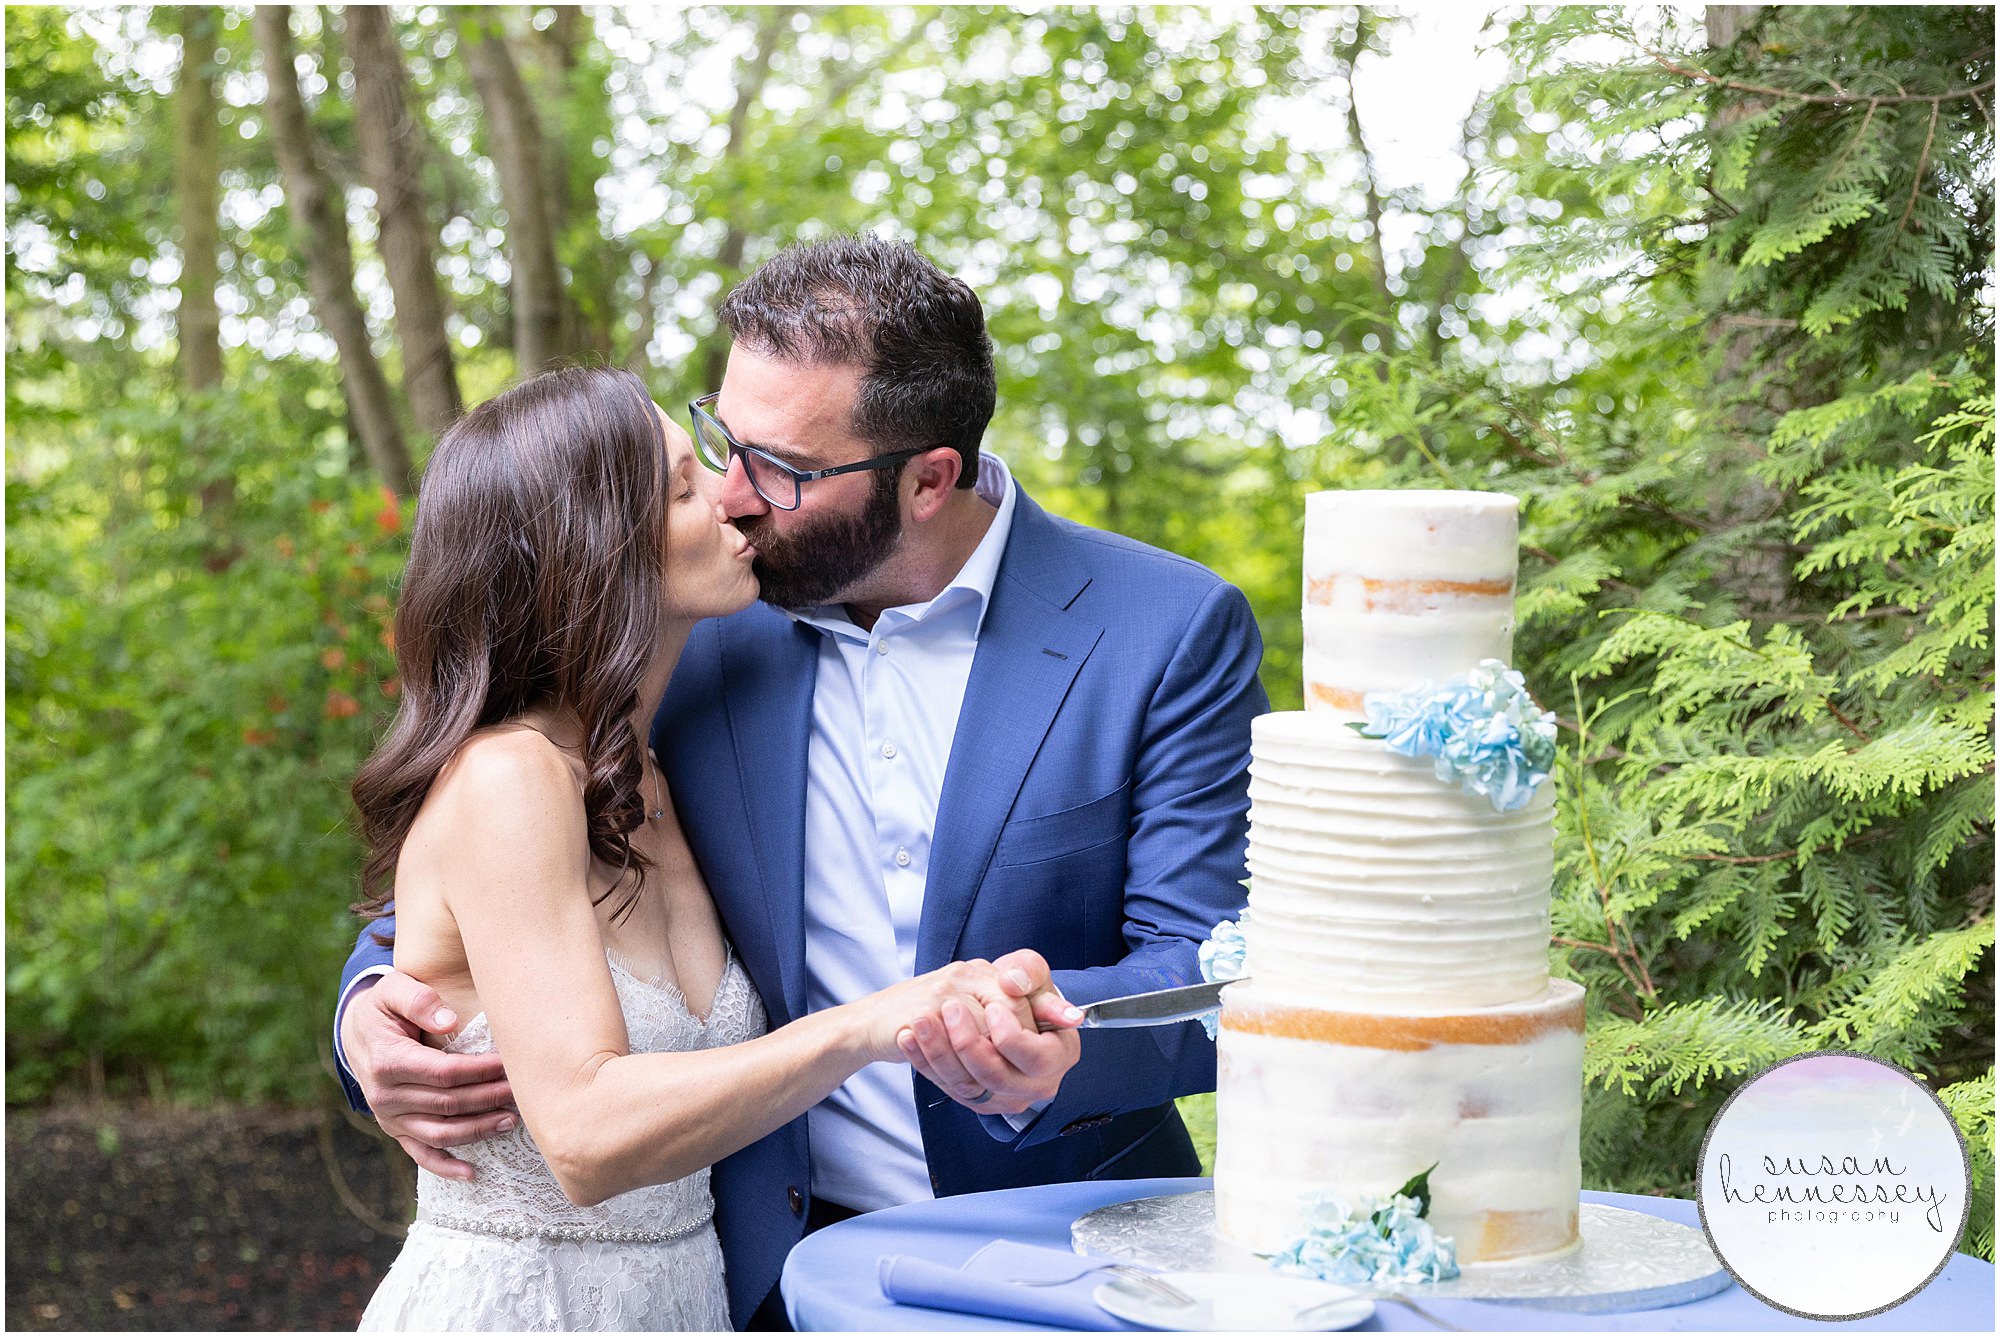 Bride and groom cut cake at South Jersey Backyard Wedding